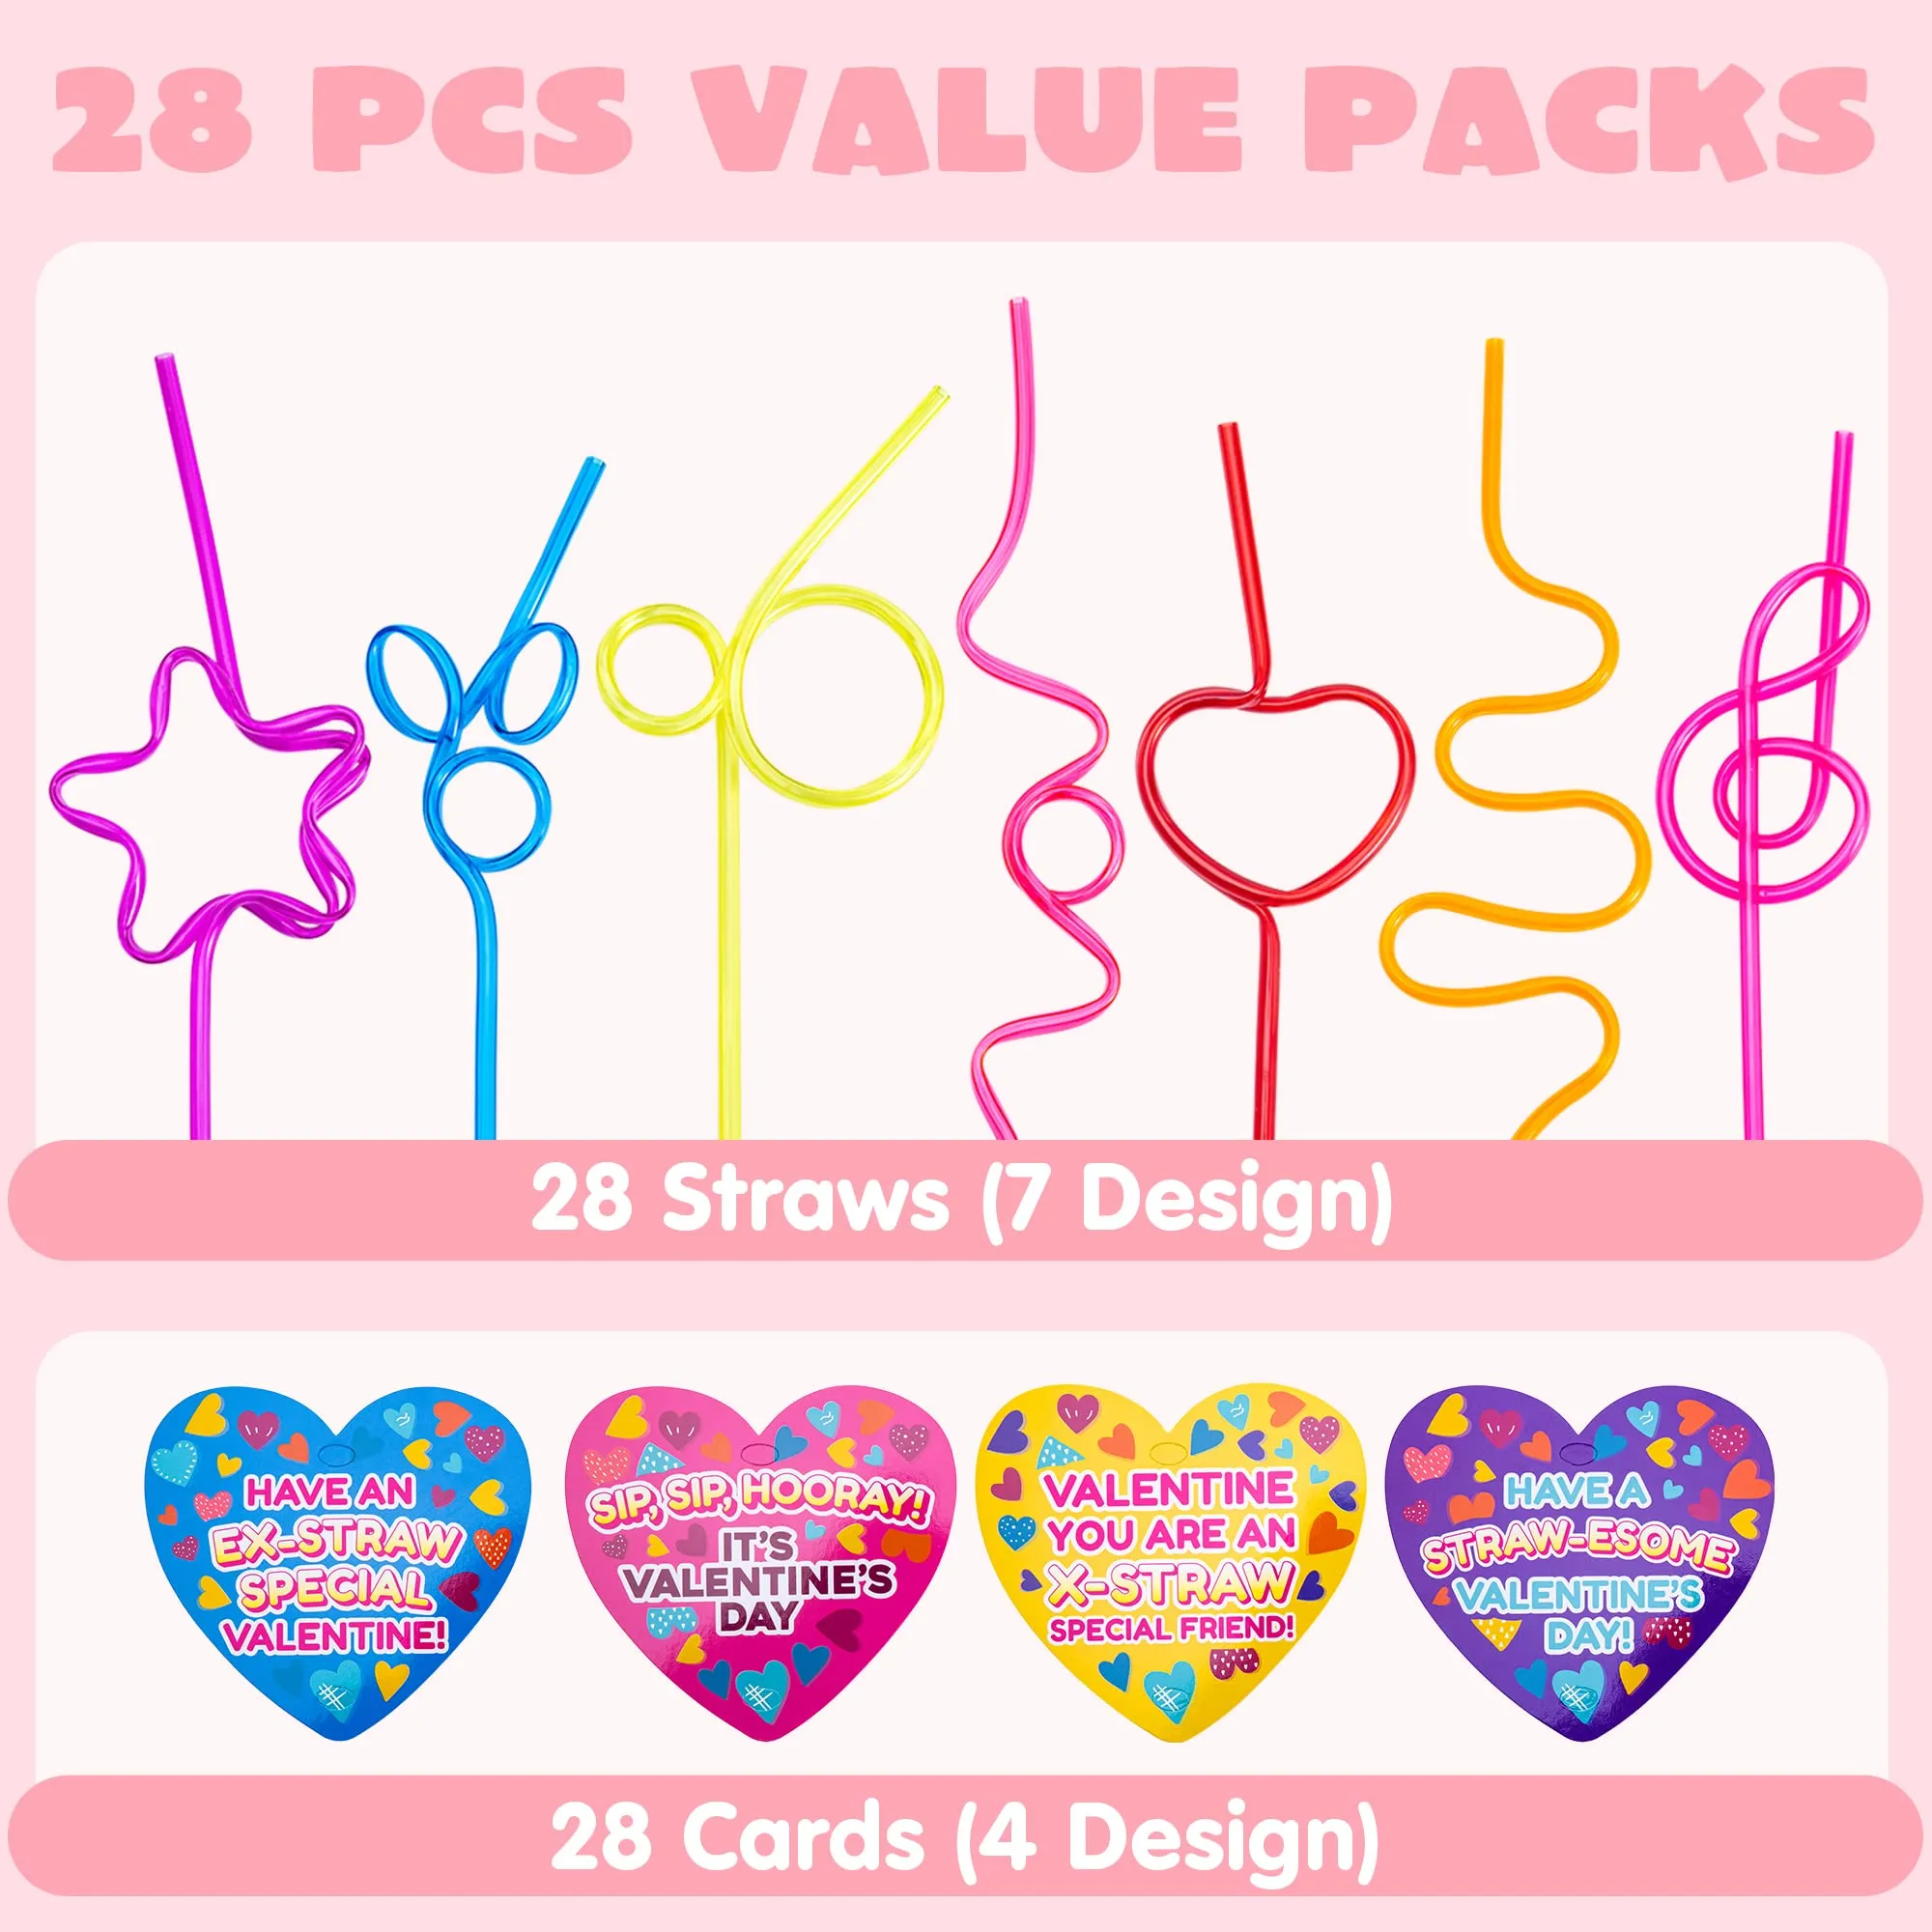 https://www.joyfy.com/wp-content/uploads/2023/01/28Pcs-Kids-Valentines-Cards-with-Gift-Colorful-Crazy-Loop-Reusable-Drinking-Straws-2_result-1.webp